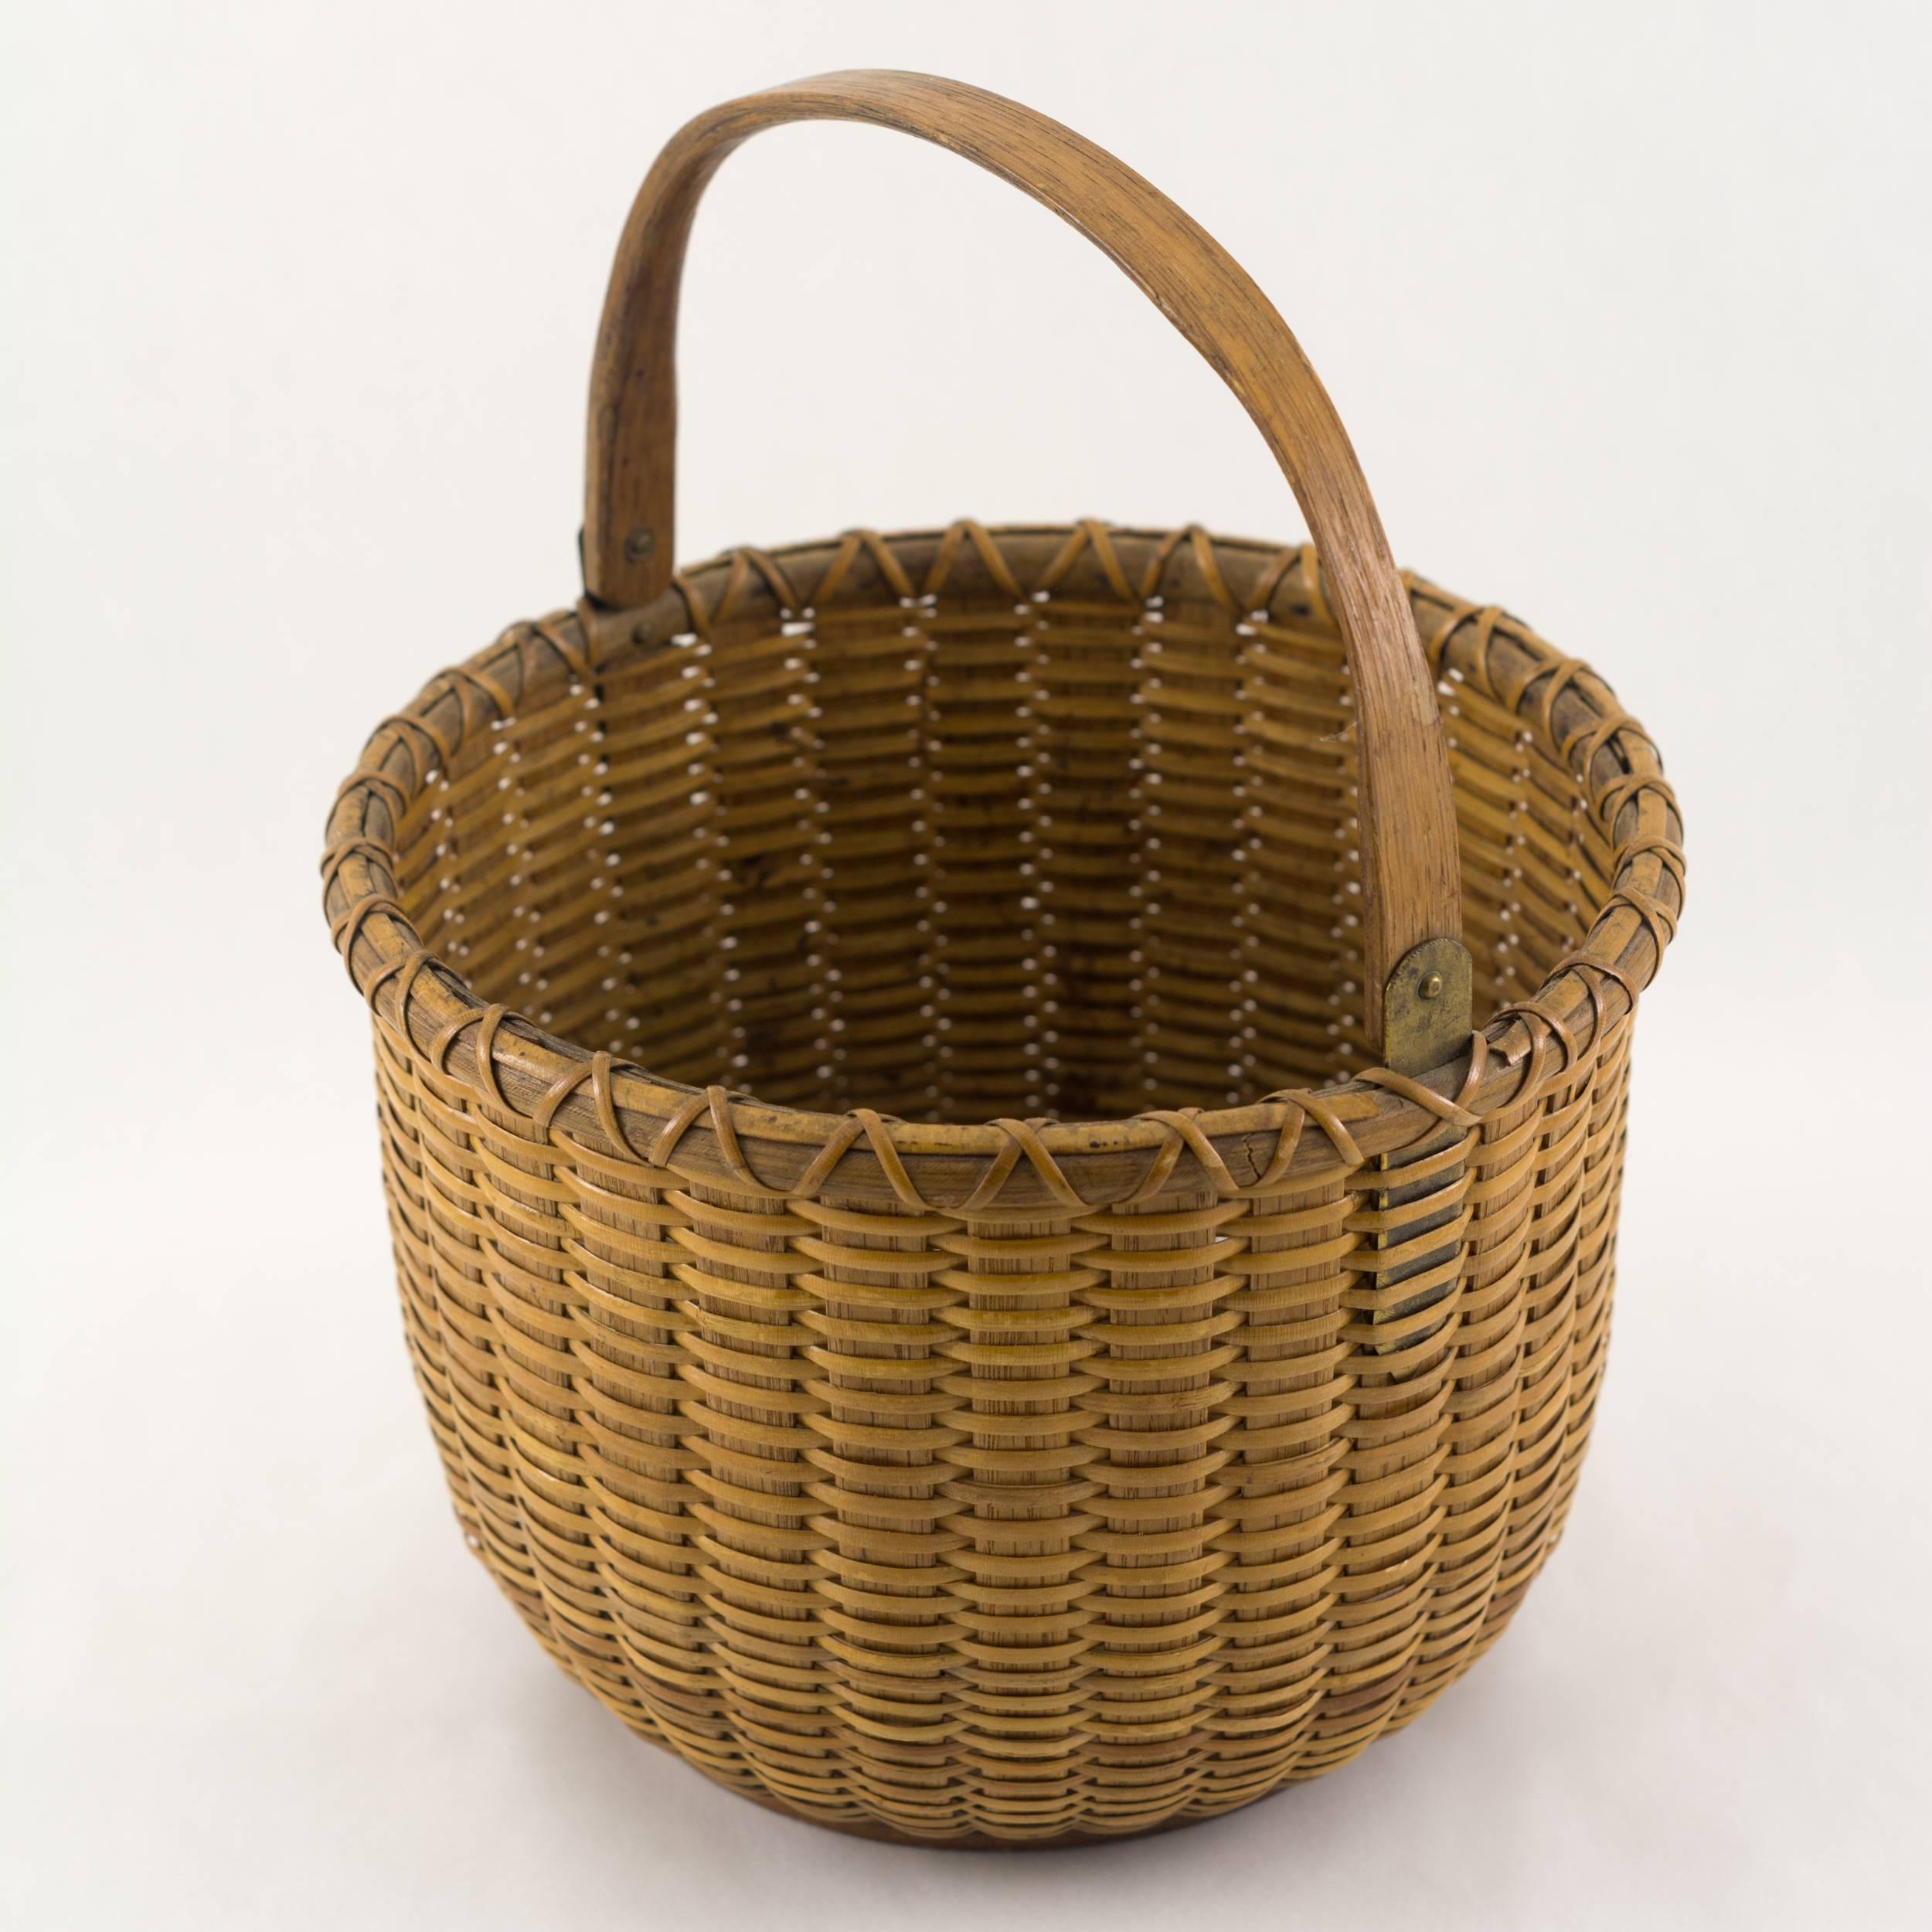 7 ½” open round Nantucket lightship basket with
brass ears , “R Folger Maker Nantucket, Mass” is
stenciled on the interior bottom, circa 1875
Rowland Folger (1803-1883).